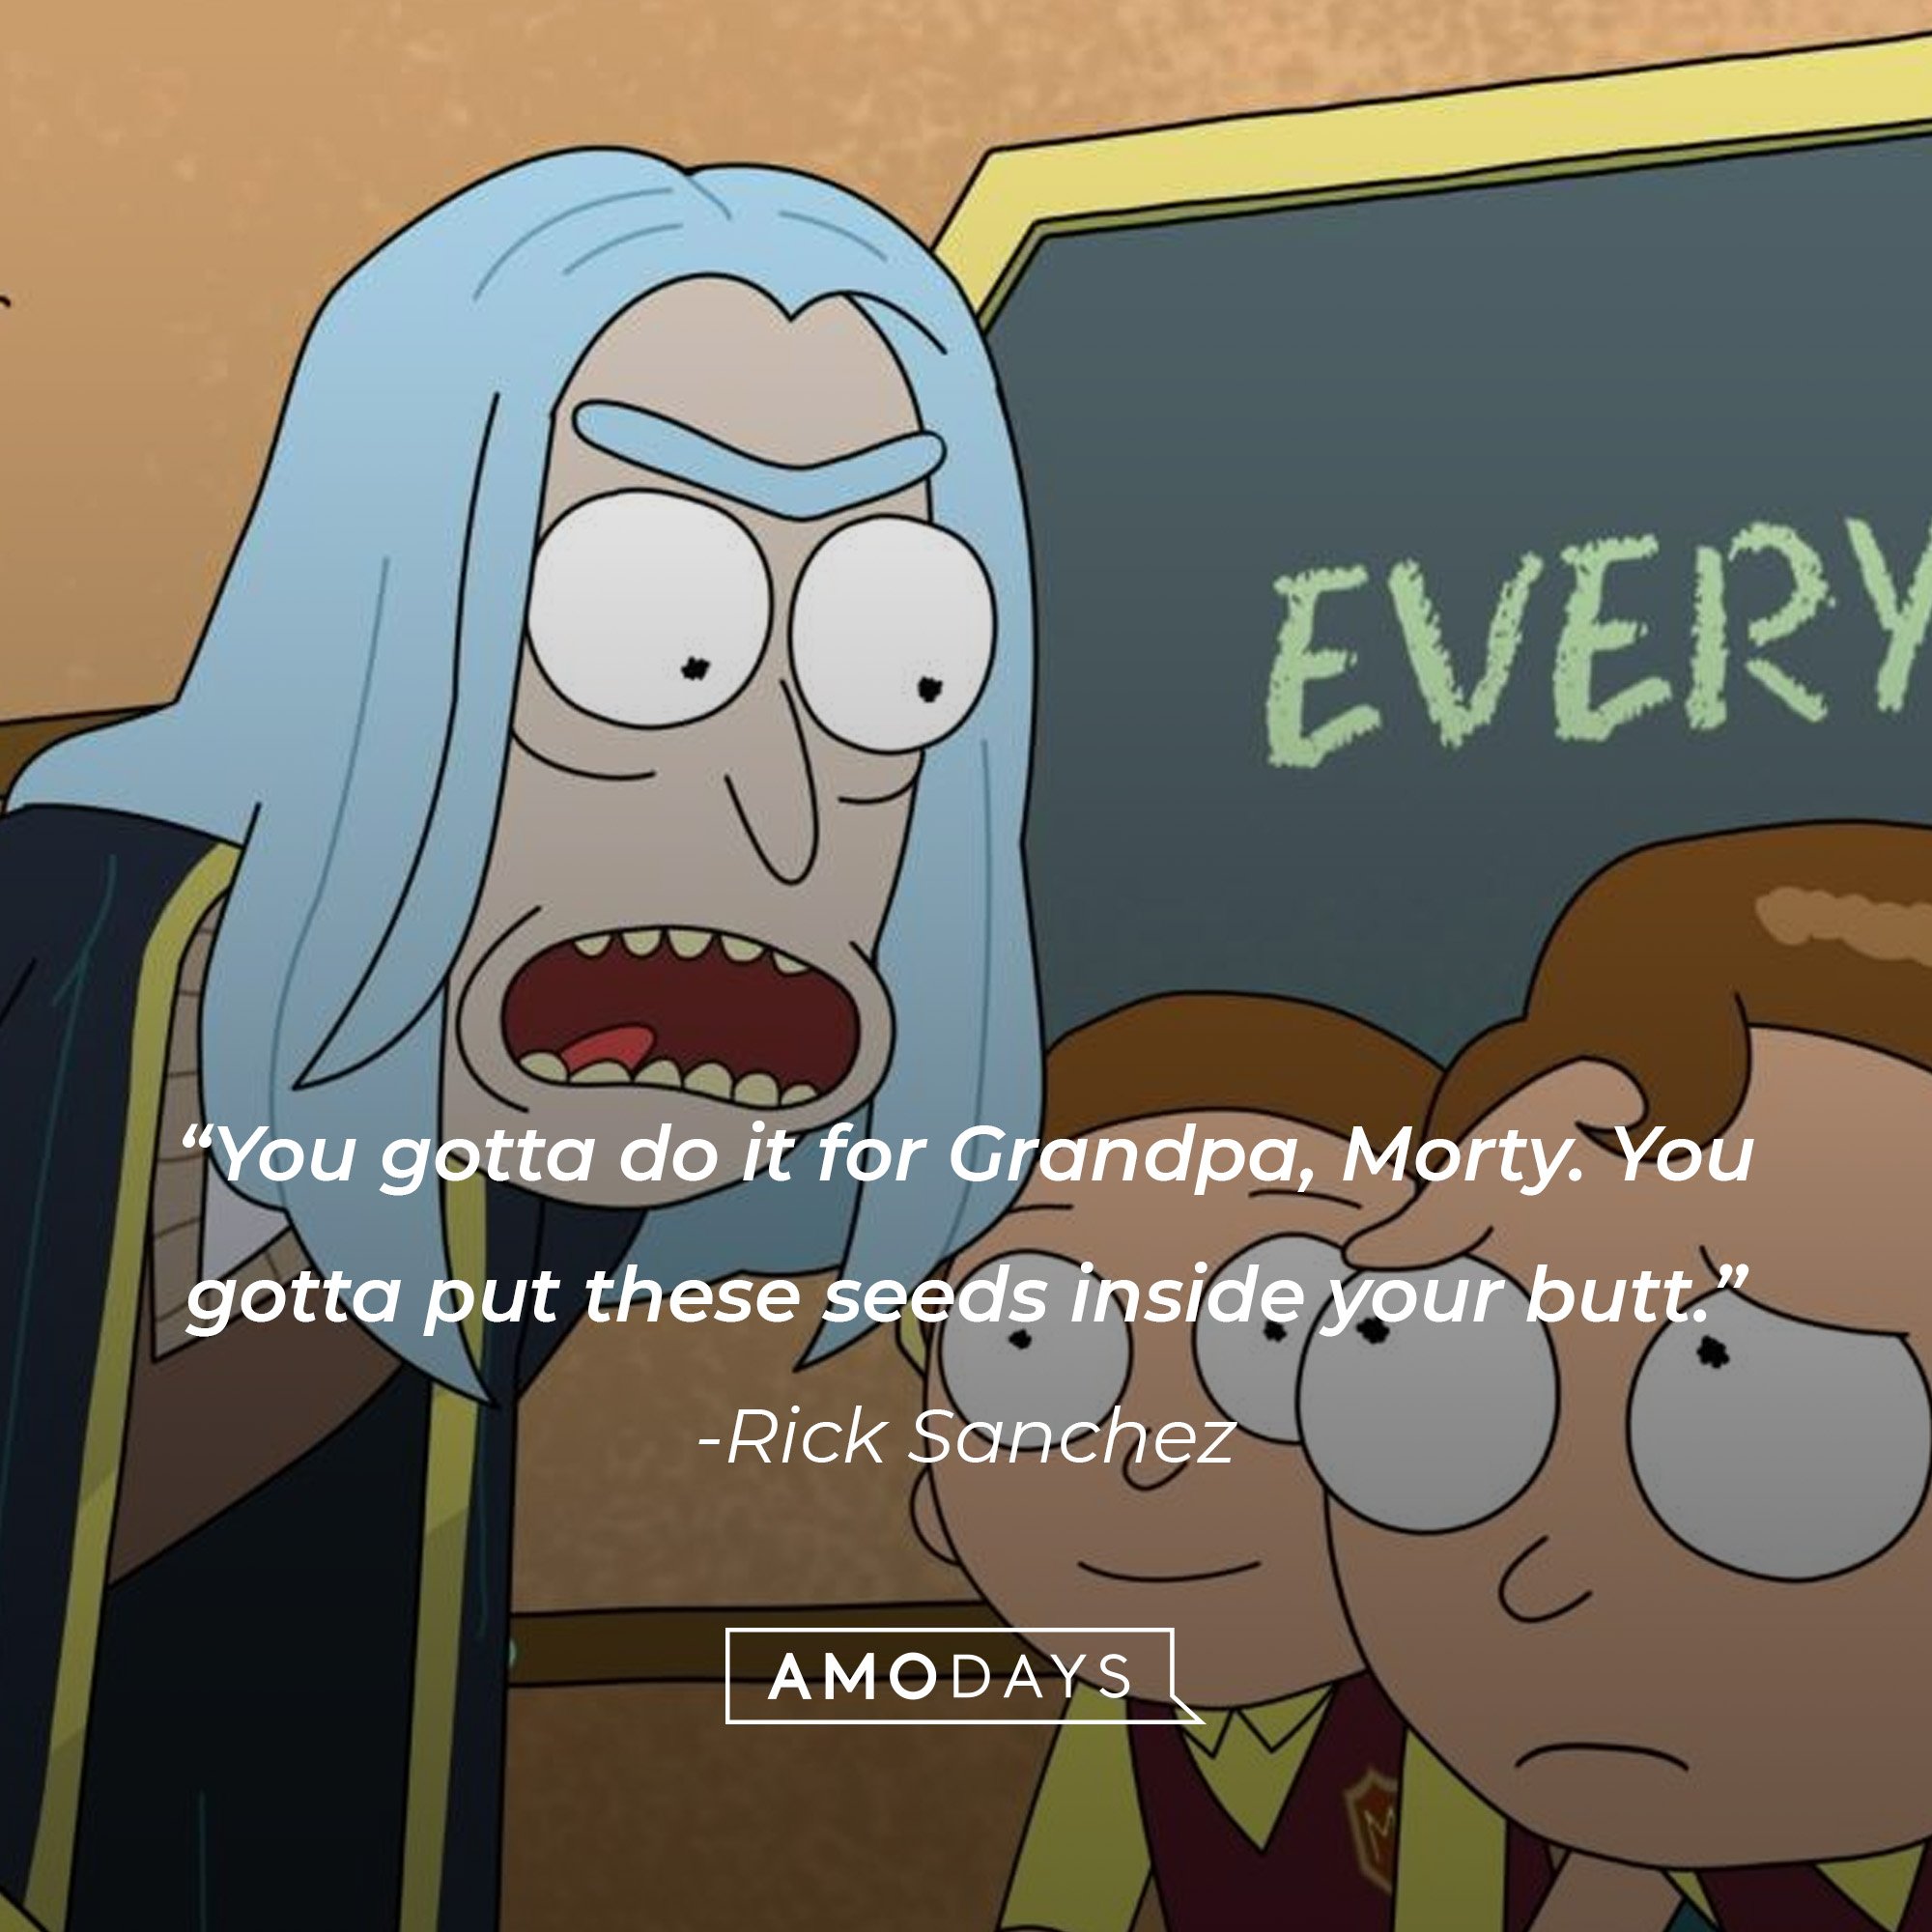 Rick Sanchez' quote: “You gotta do it for Grandpa, Morty. You gotta put these seeds inside your butt.”   | Image: AmoDays